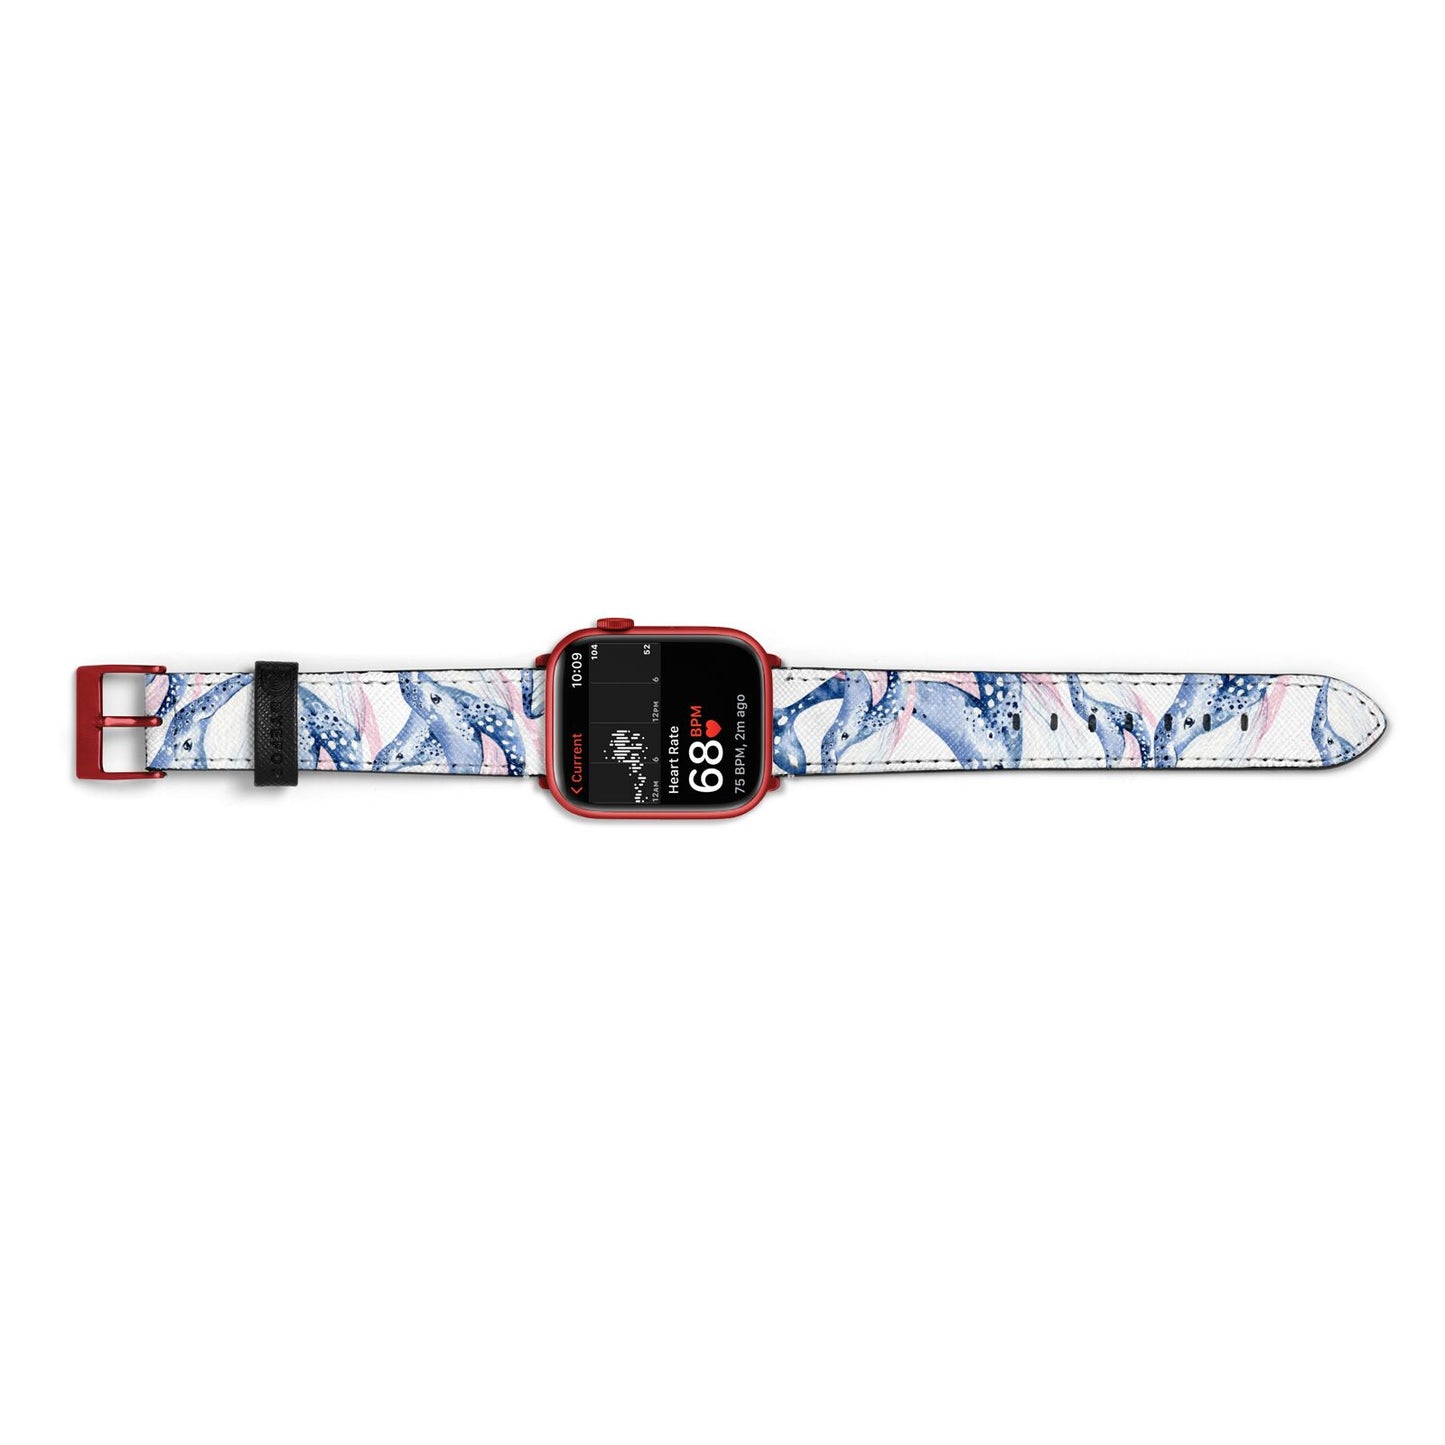 Whale Apple Watch Strap Size 38mm Landscape Image Red Hardware